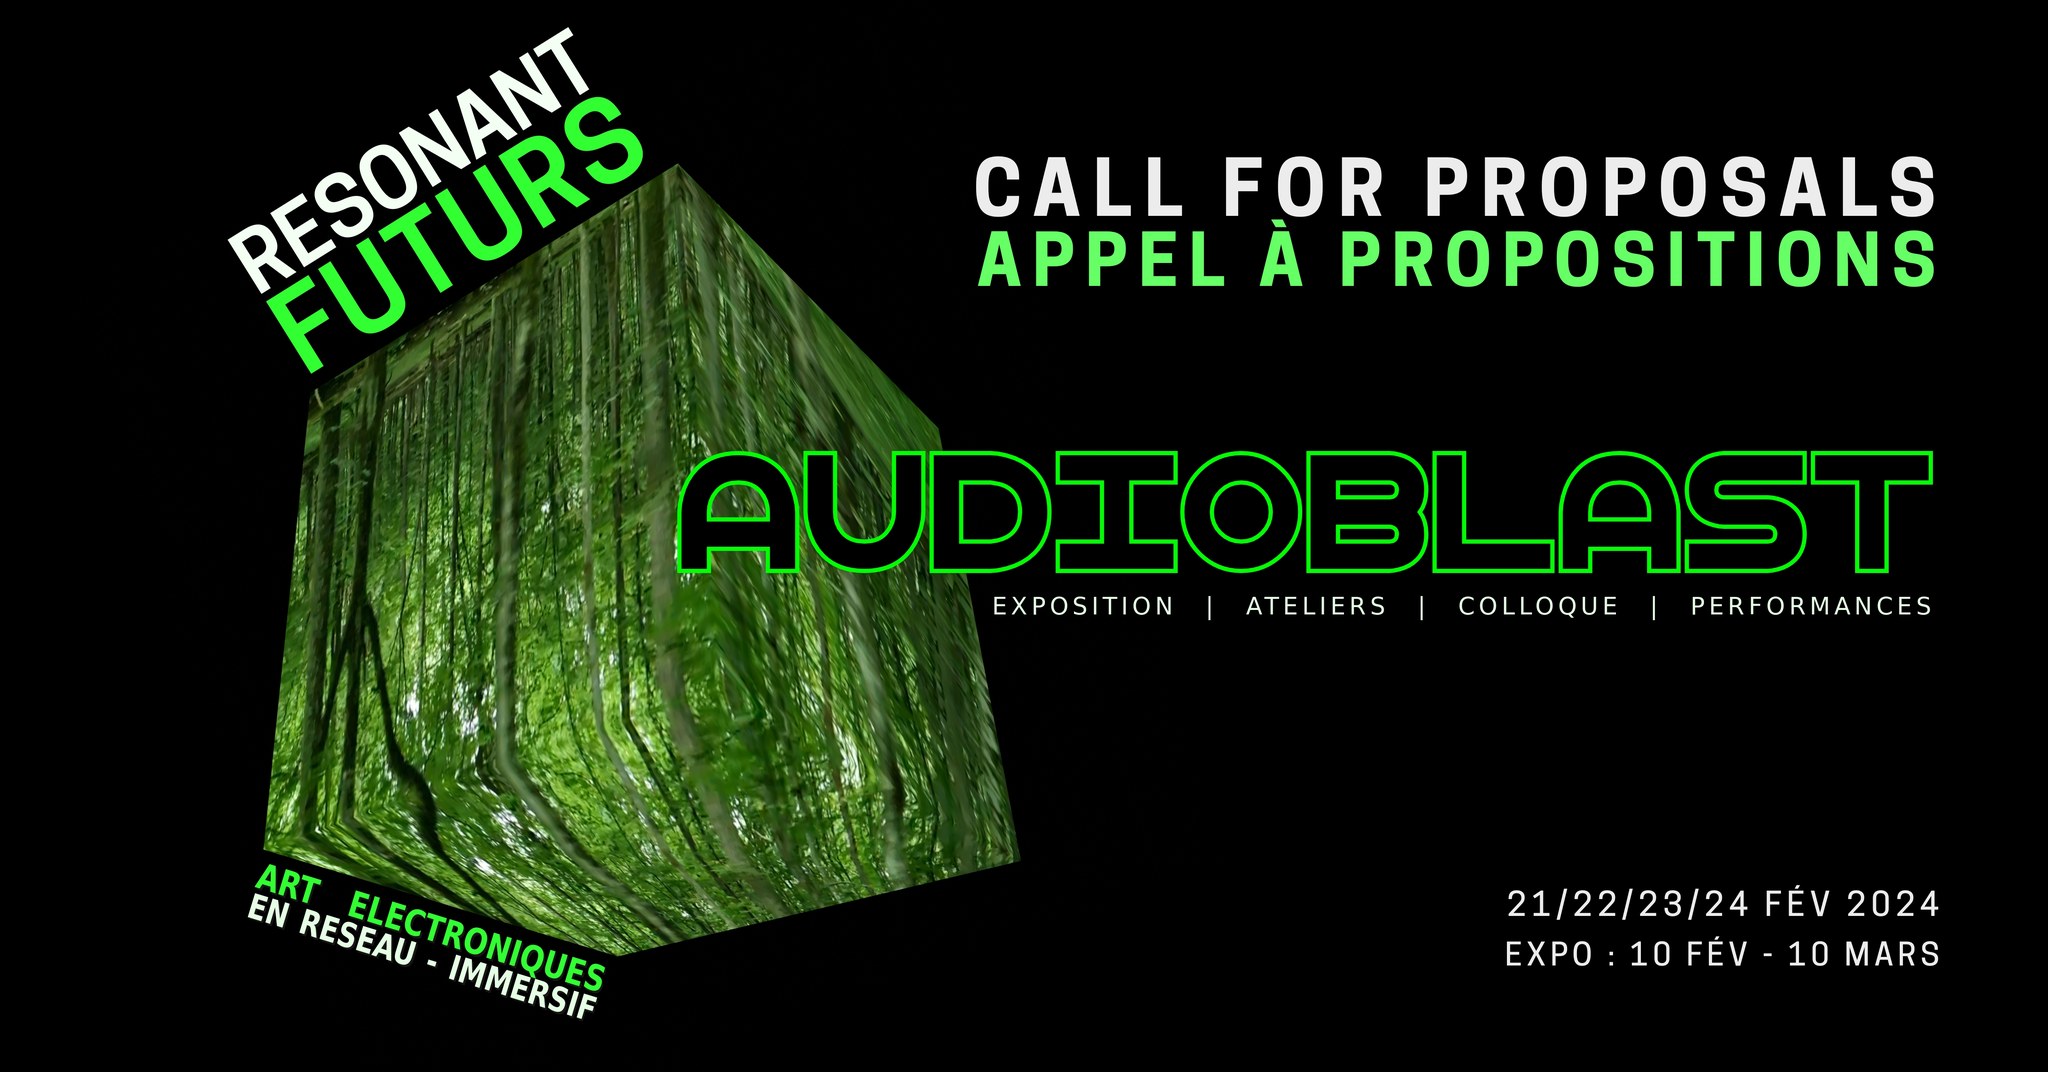 Call for Proposals for an Audioblast Live Transmission Project